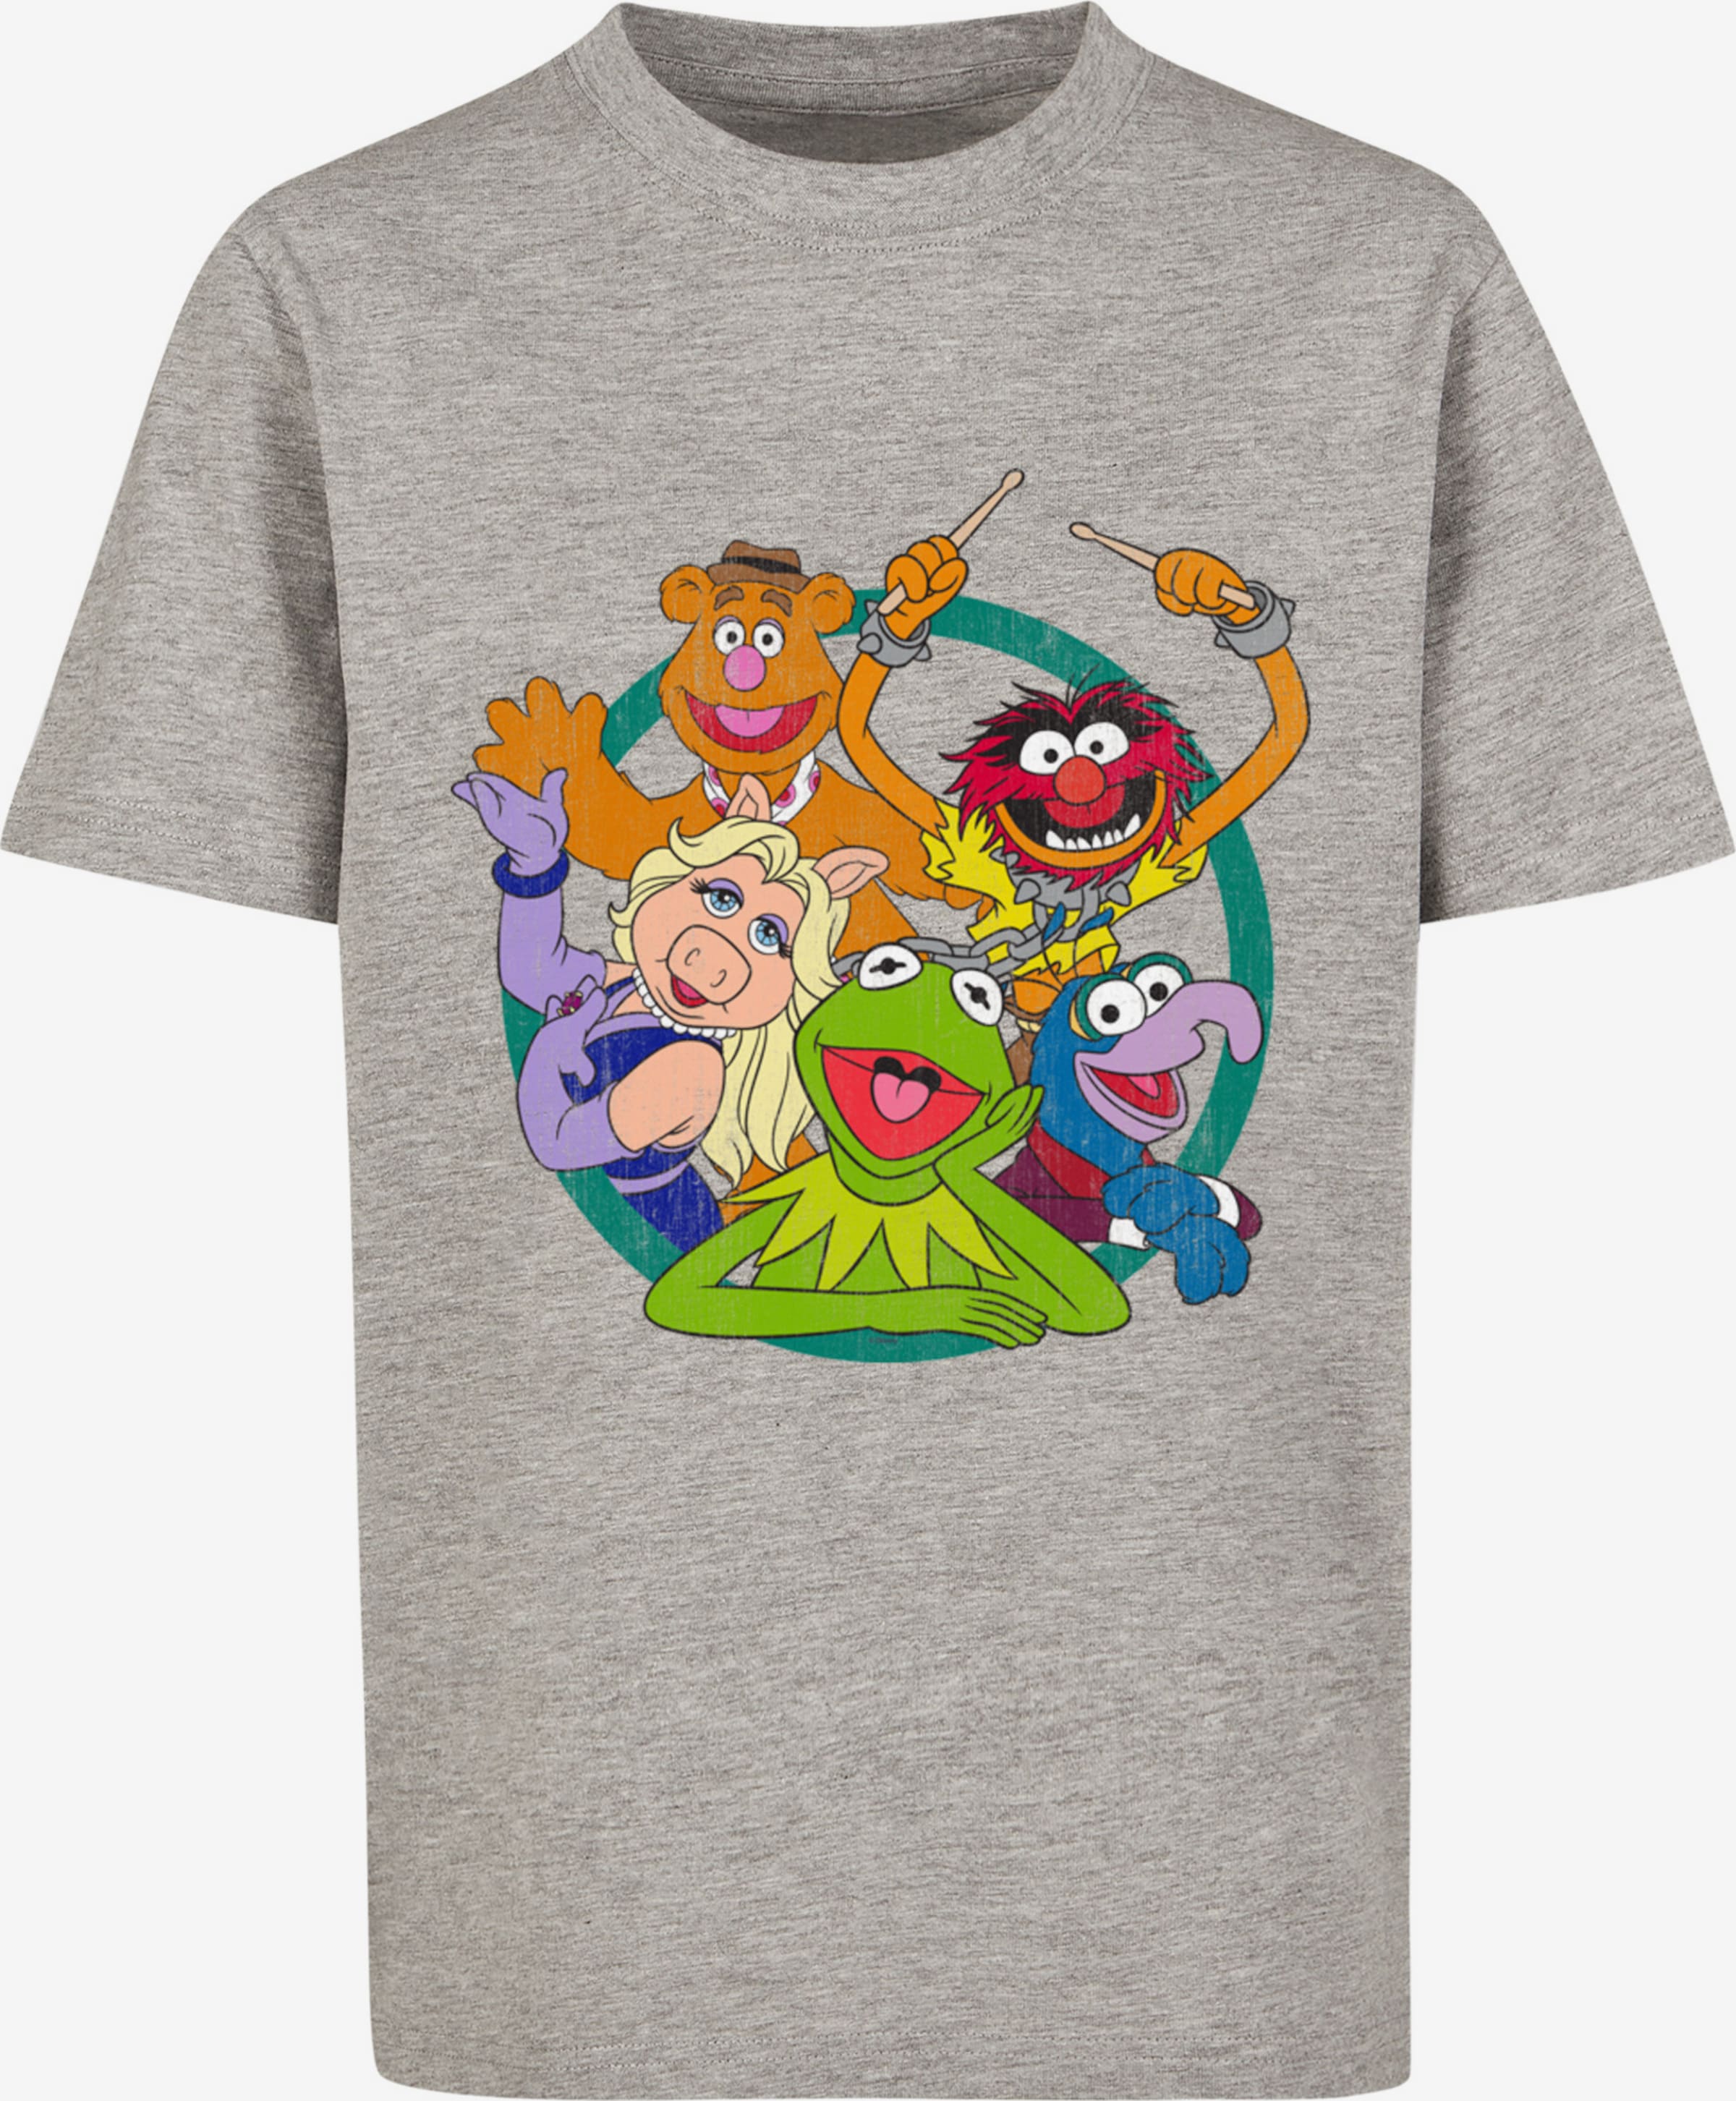 F4NT4STIC T-Shirt 'Disney The Muppets Group Circle' in Graumeliert | ABOUT  YOU